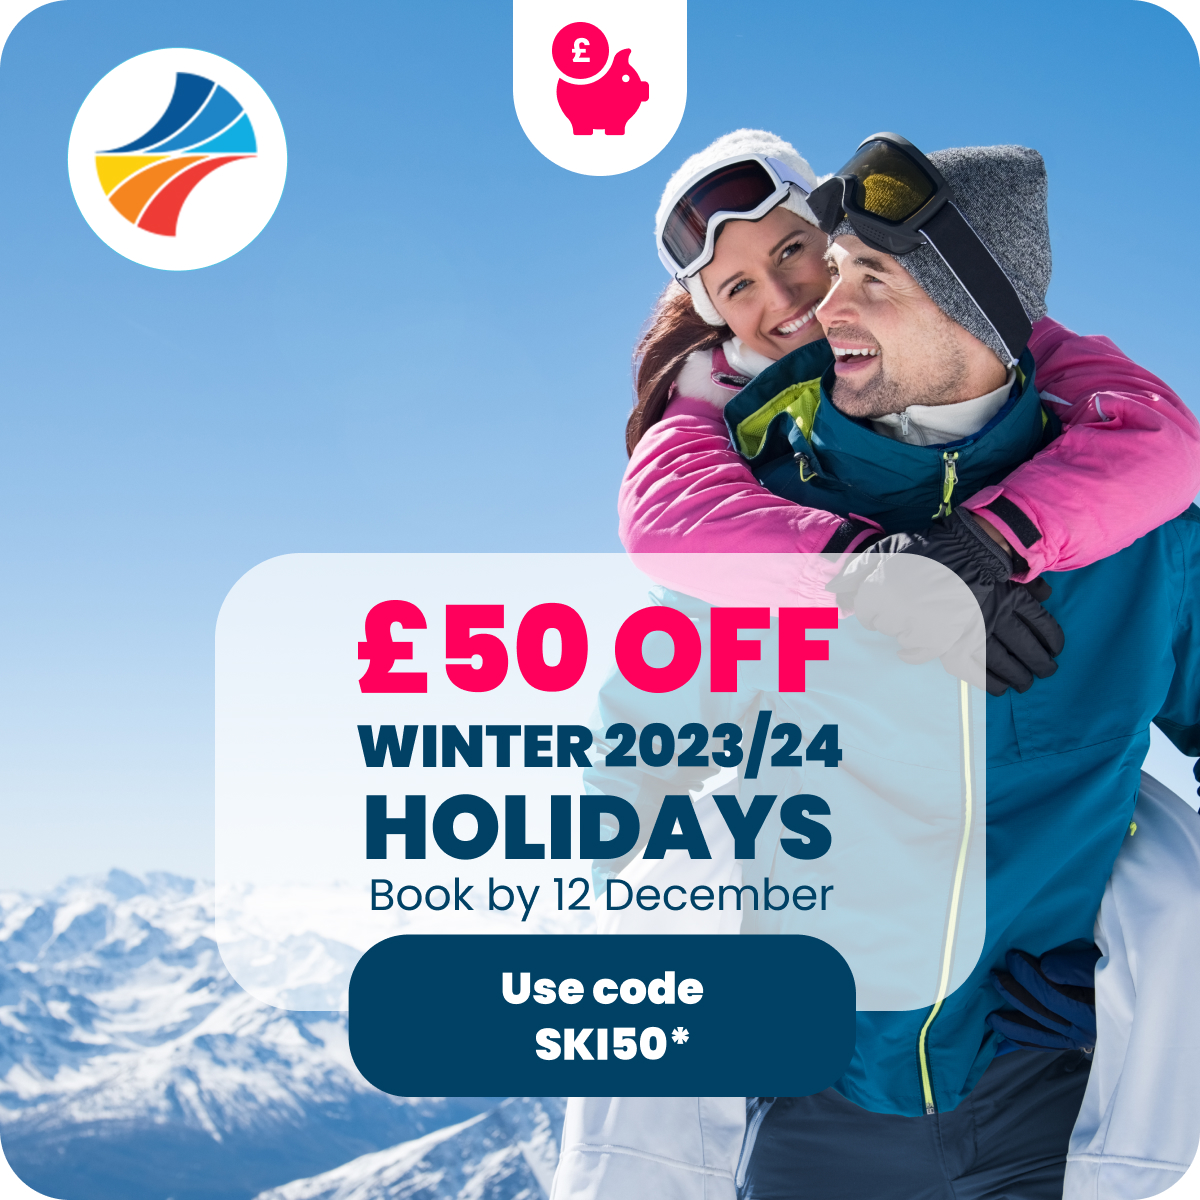 🎉 To celebrate the arrival of the snow in Bulgaria you can treat yourself to £50 OFF ski bookings to Bulgaria in our SNOW FALL SKI SALE! ❄ That’s £50 off our already discounted prices! 🎉 Book now: bit.ly/483WVW4